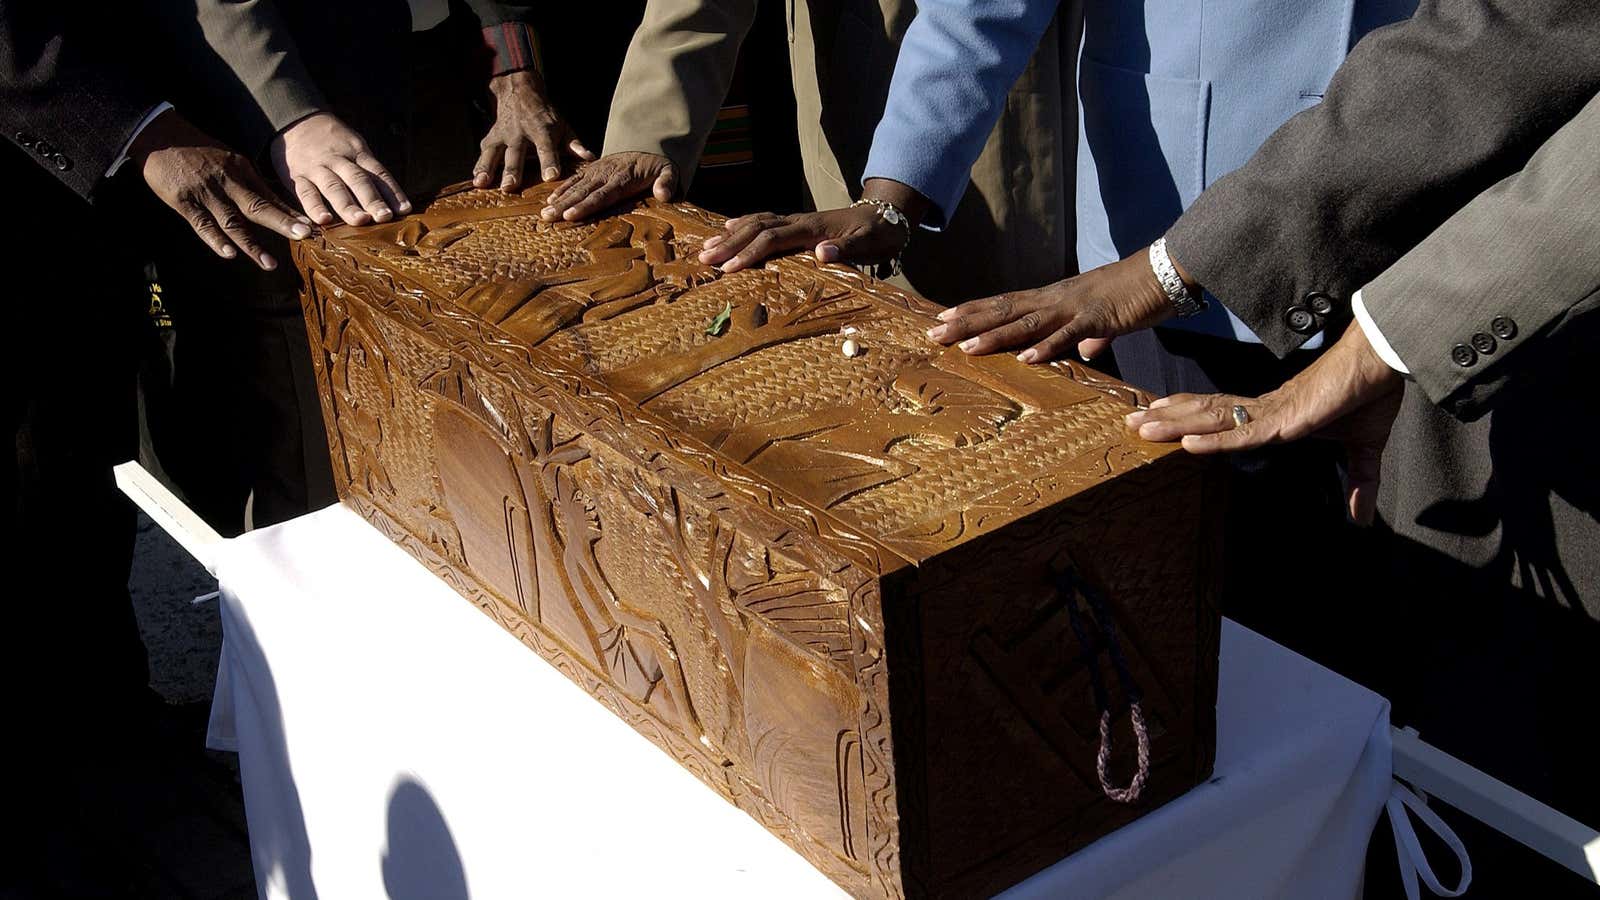 More than 400 caskets containing the remains of slaves were re-burried after they were discovered during building construction in Manhattan.